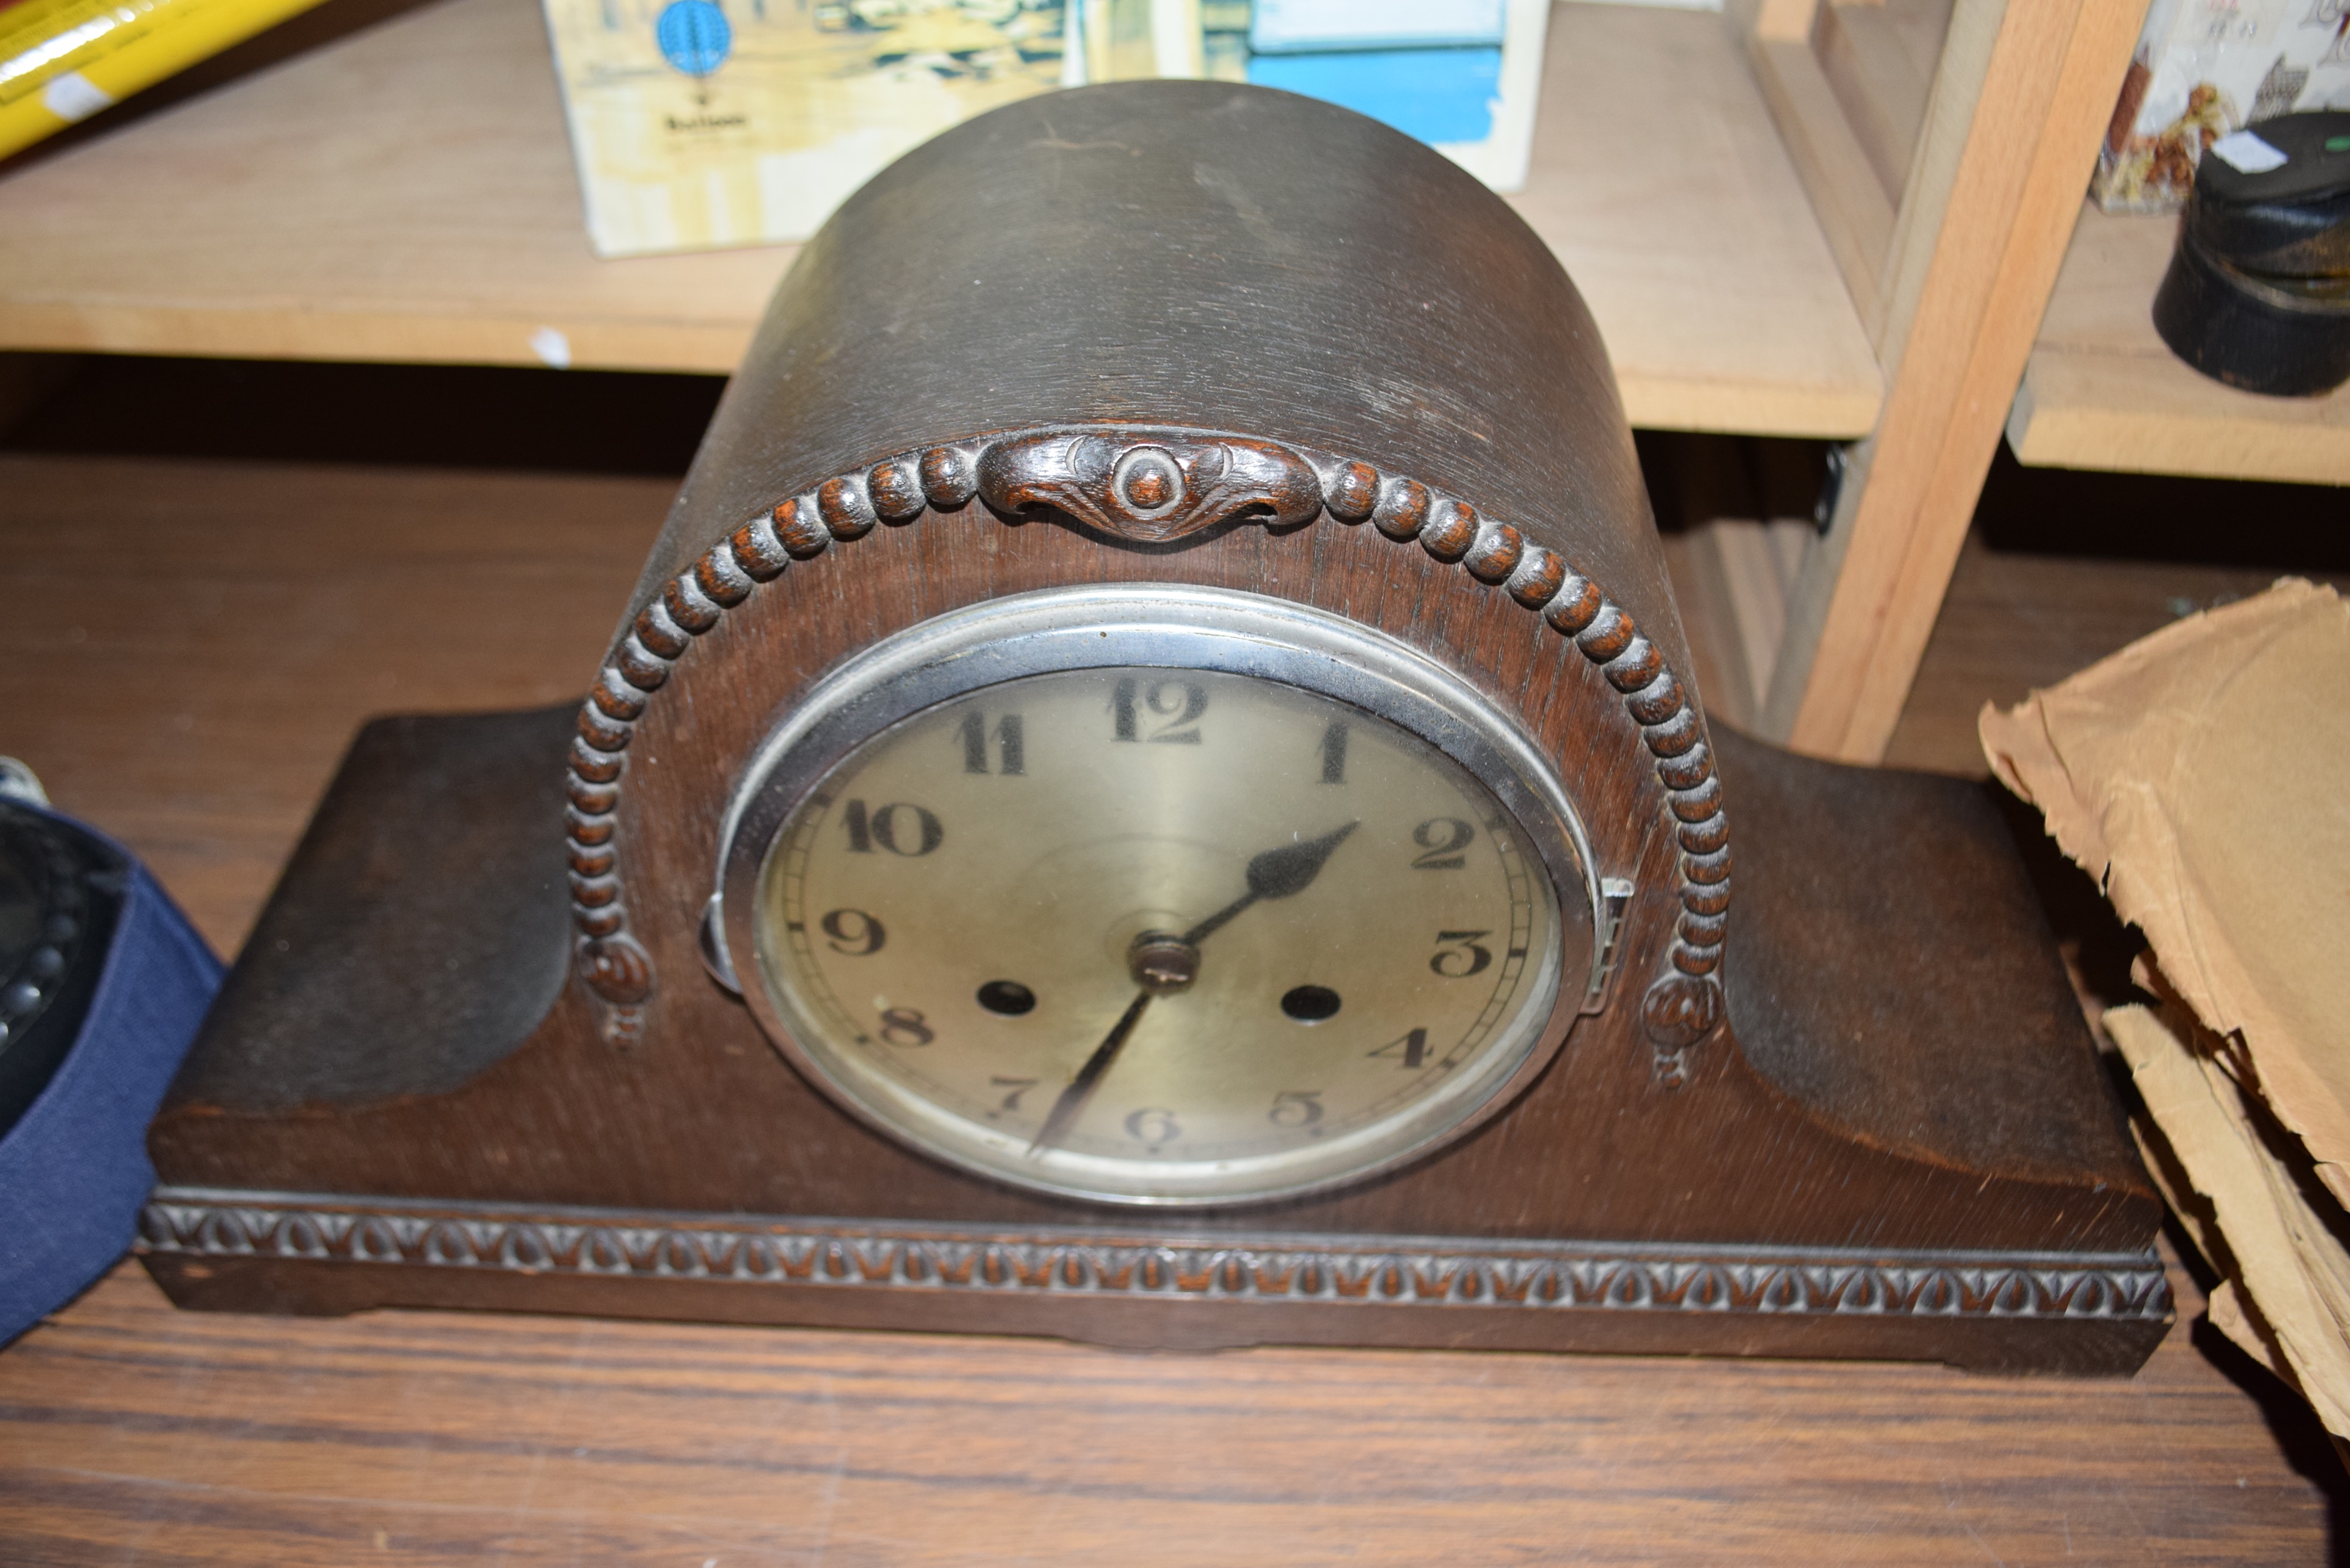 TWO DOME TOPPED MANTEL CLOCKS - Image 6 of 6